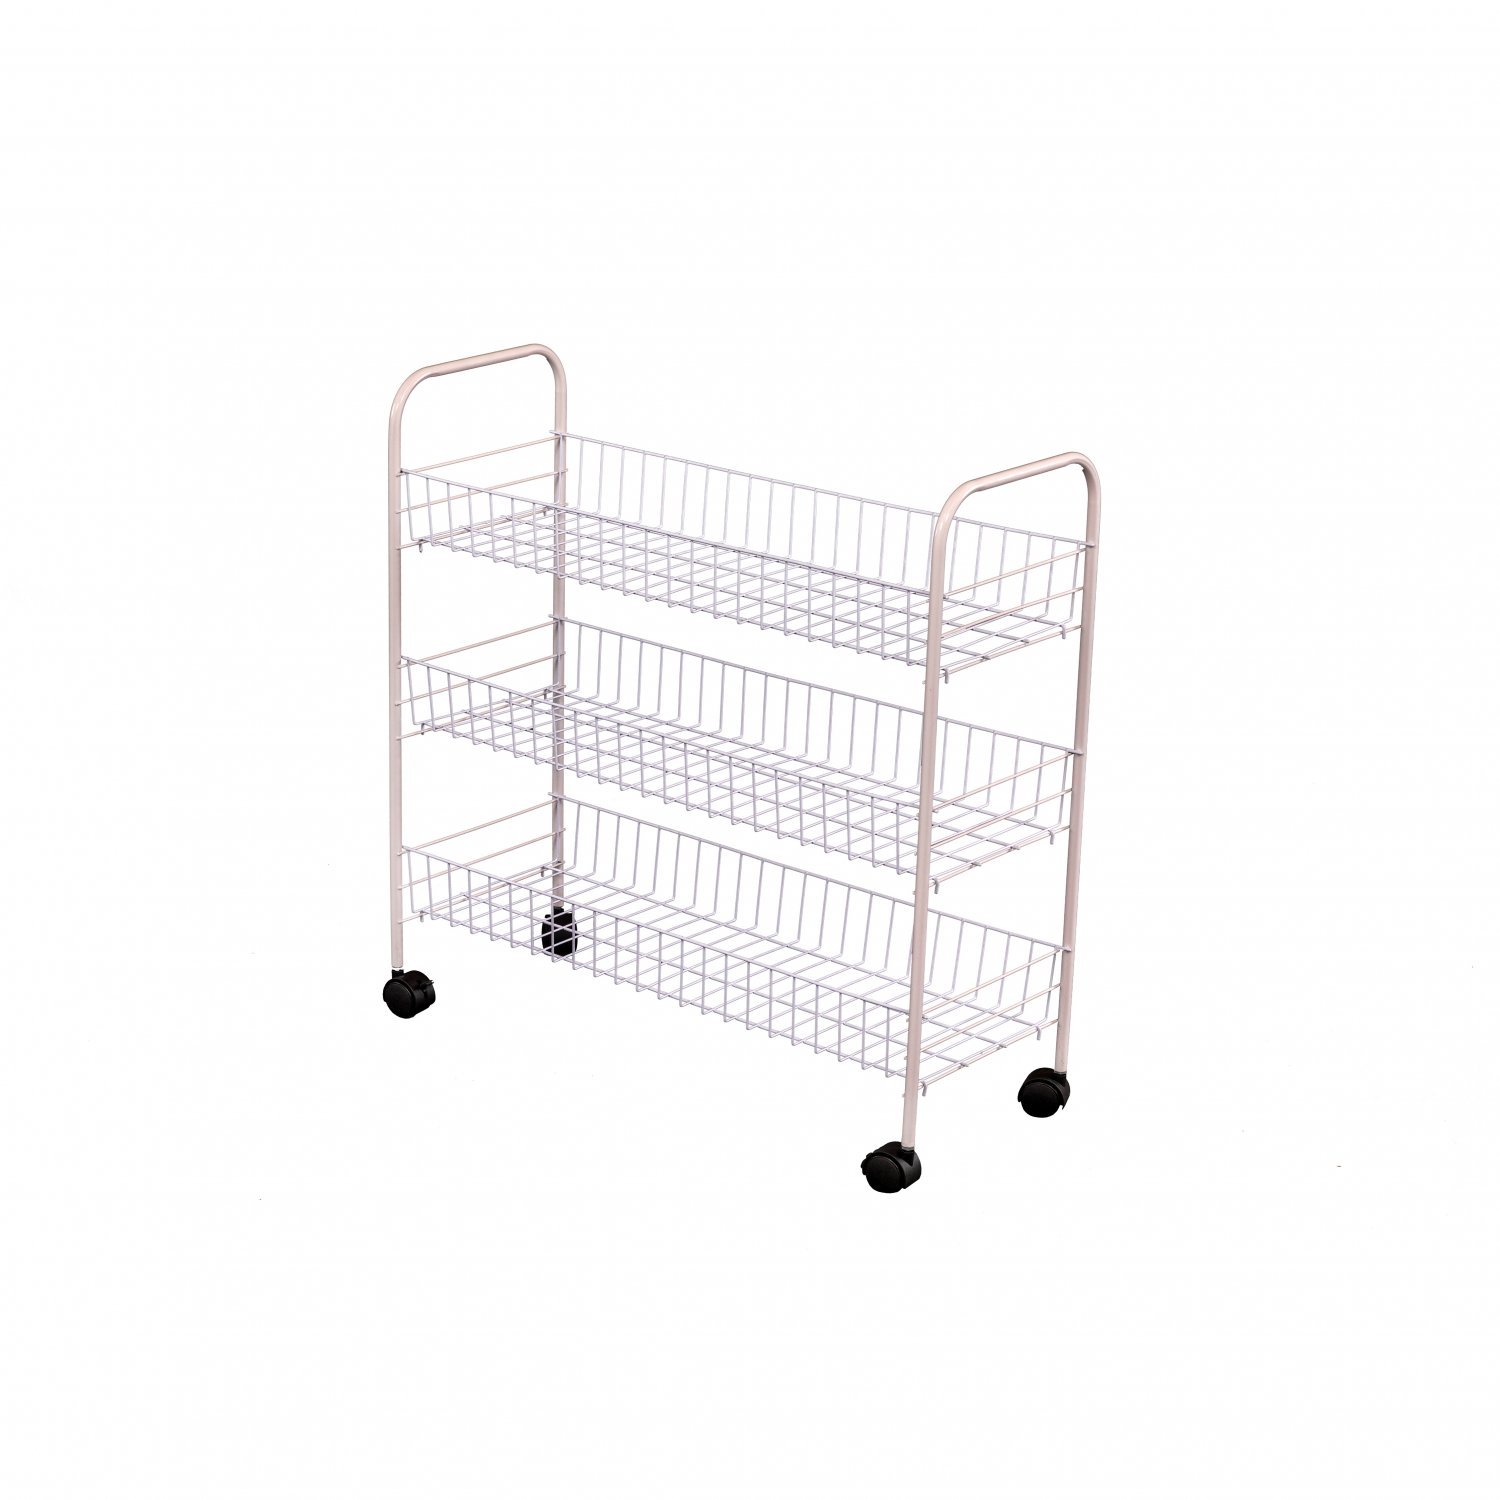 Mobile Vegetable Rack White, 3-Tier/37x37x75cm YIFAA Kitchen Trolley Cart Storage with Baskets Drawer 